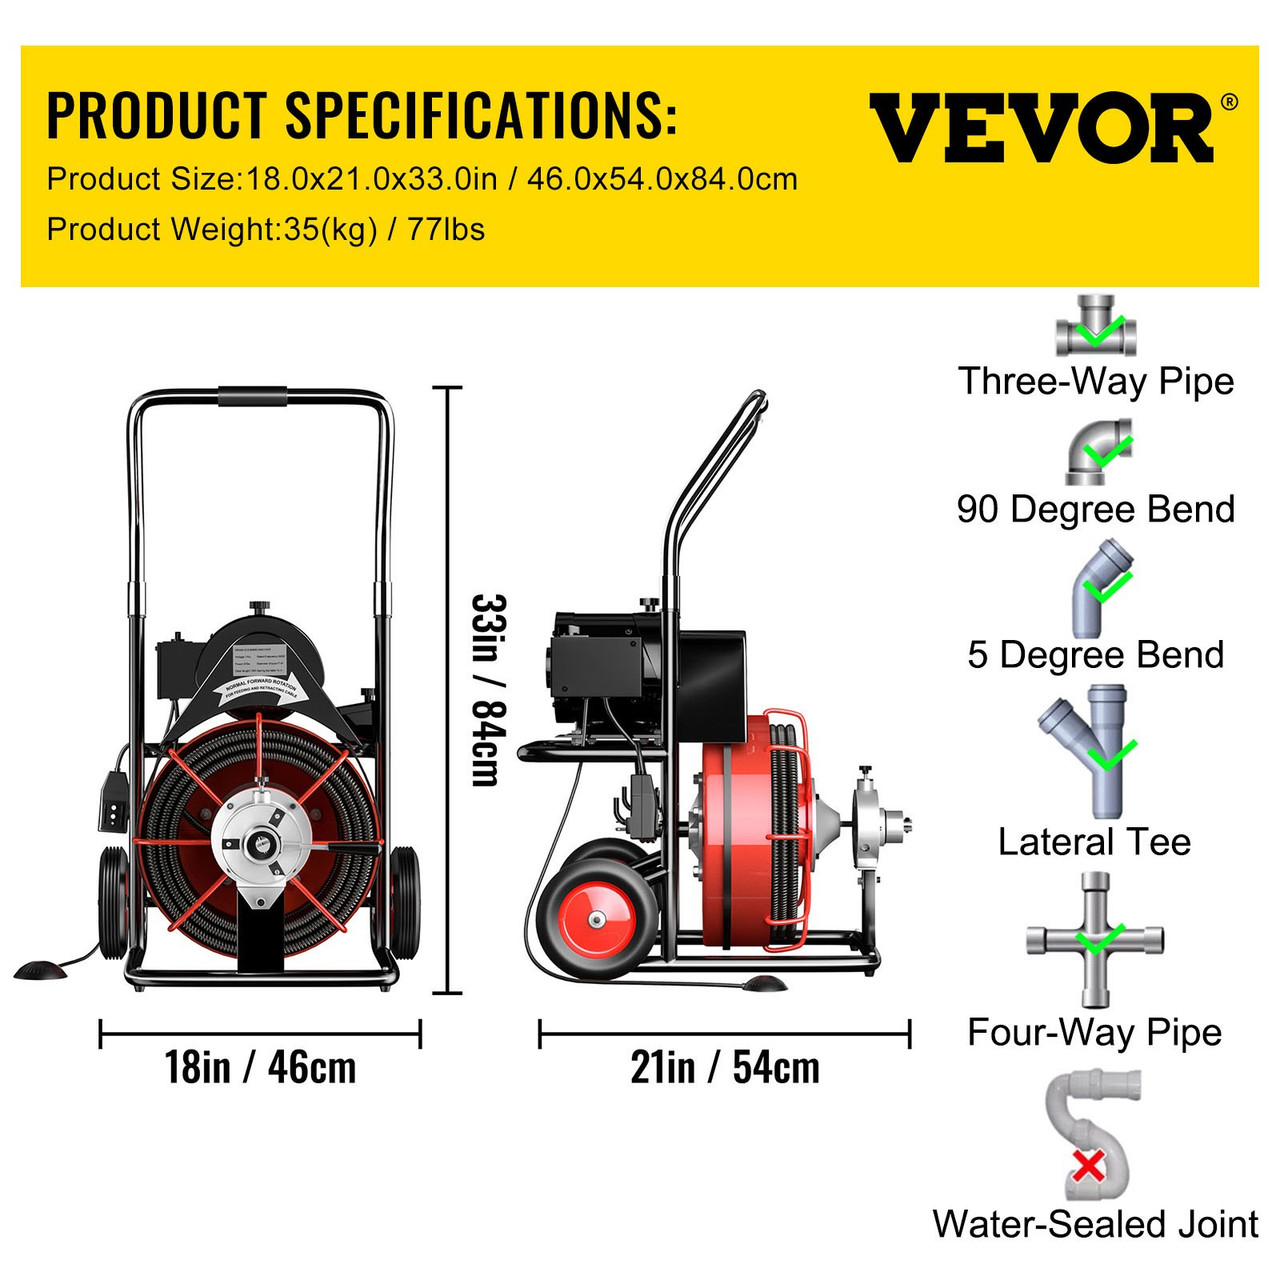 50 Ft x 1/2Inch Drain Cleaner Machine Auto Feed fit 1"(25mm) to 4"(100mm) Pipes 370W Open Drain Cleaning Machine Portable Electric Drain Auger with Cutters Glove Sewer Snake